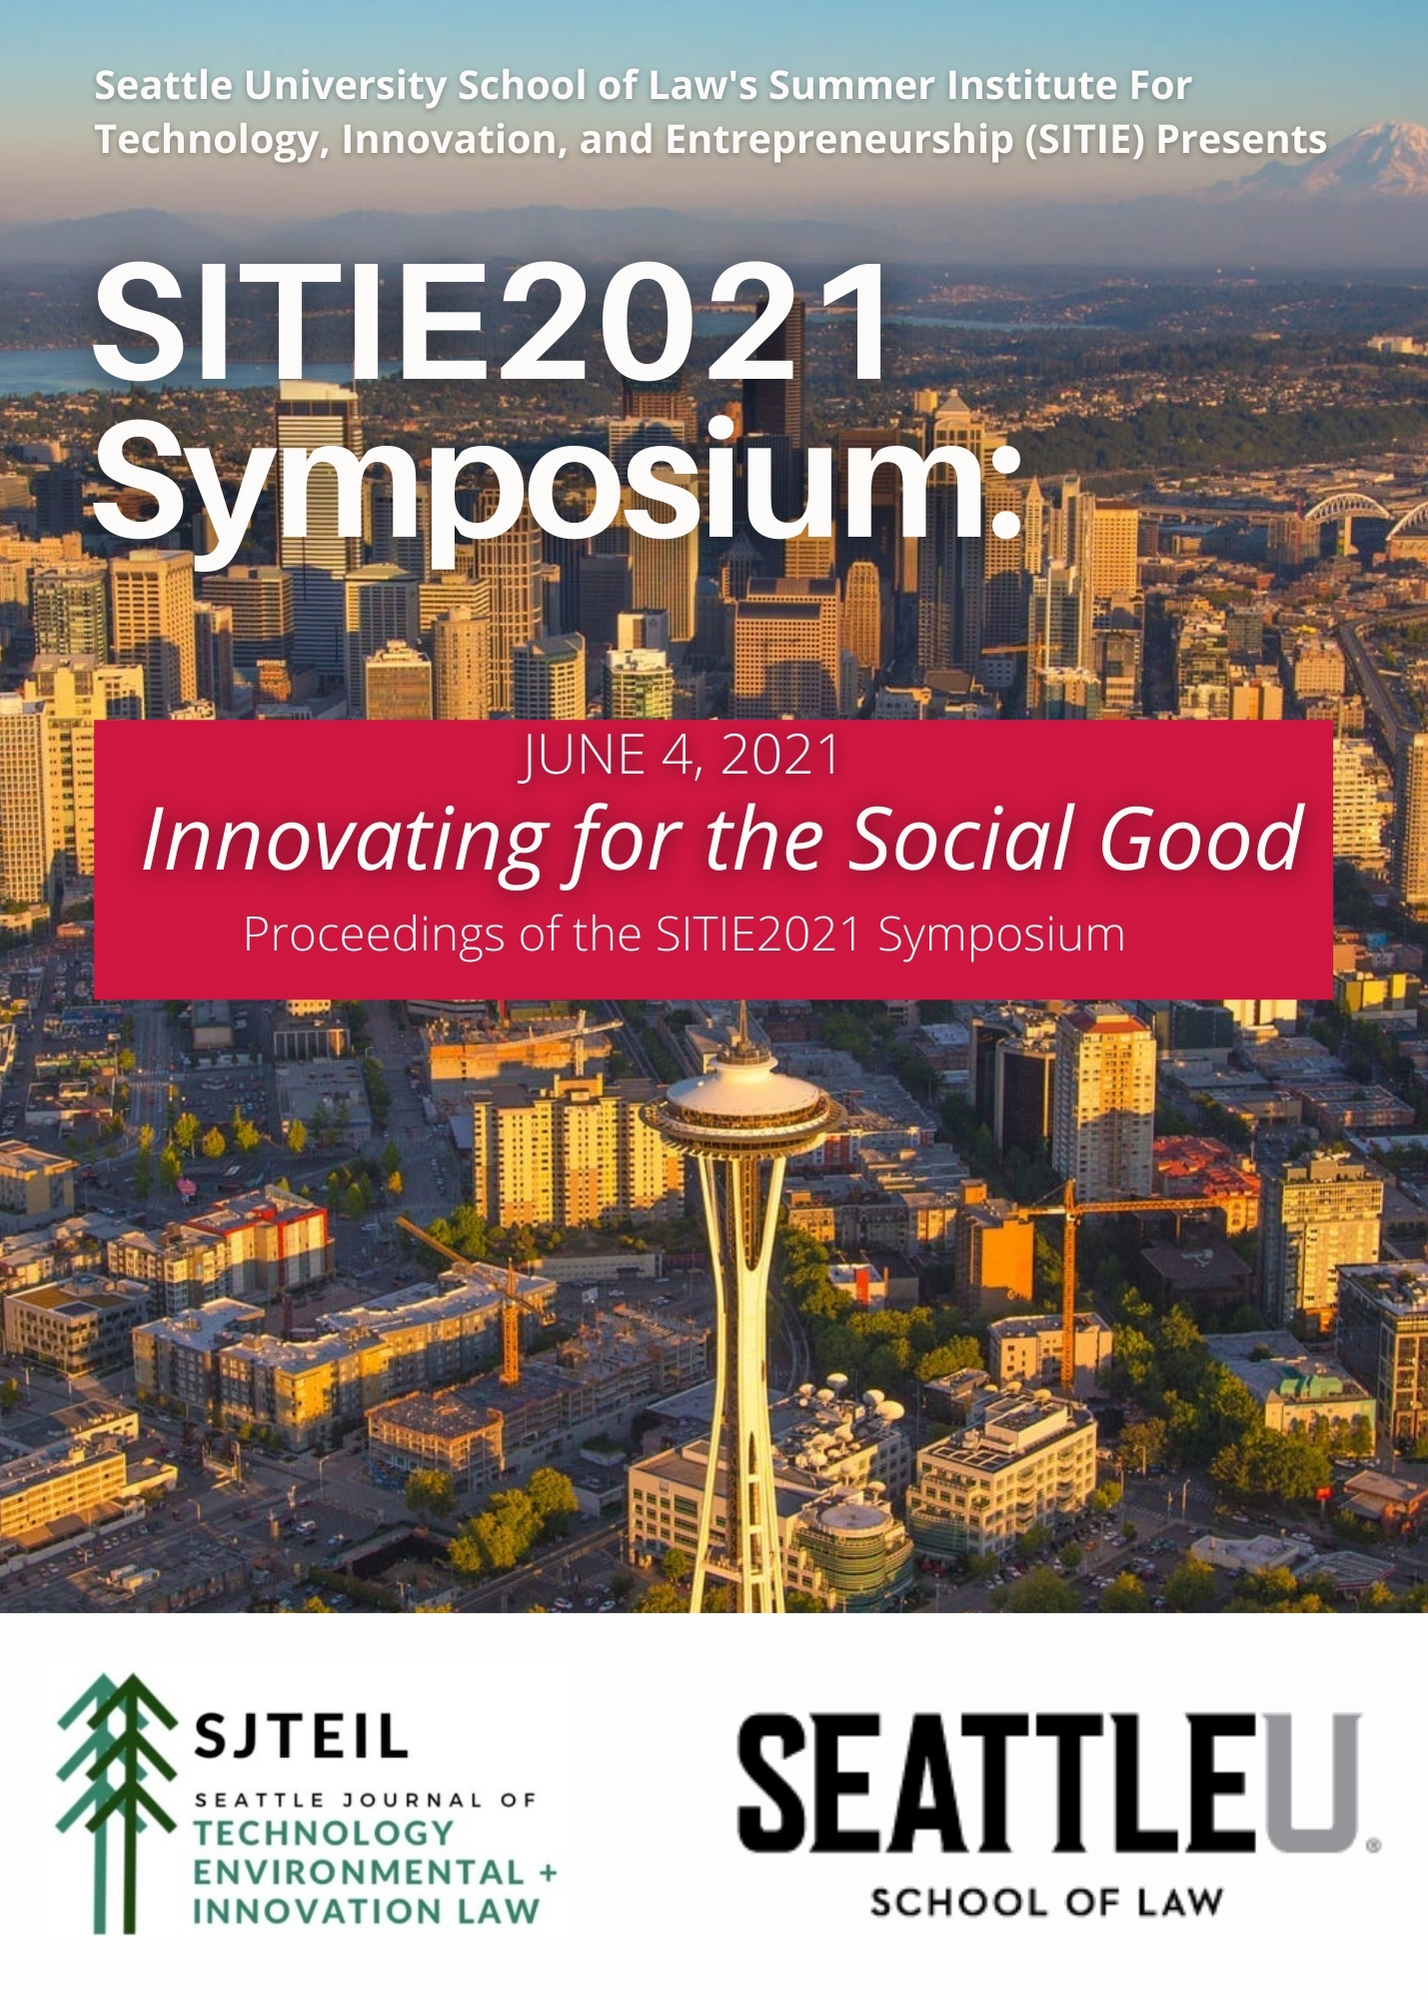 SITIE2021 Symposium: Innovating for the Social Good